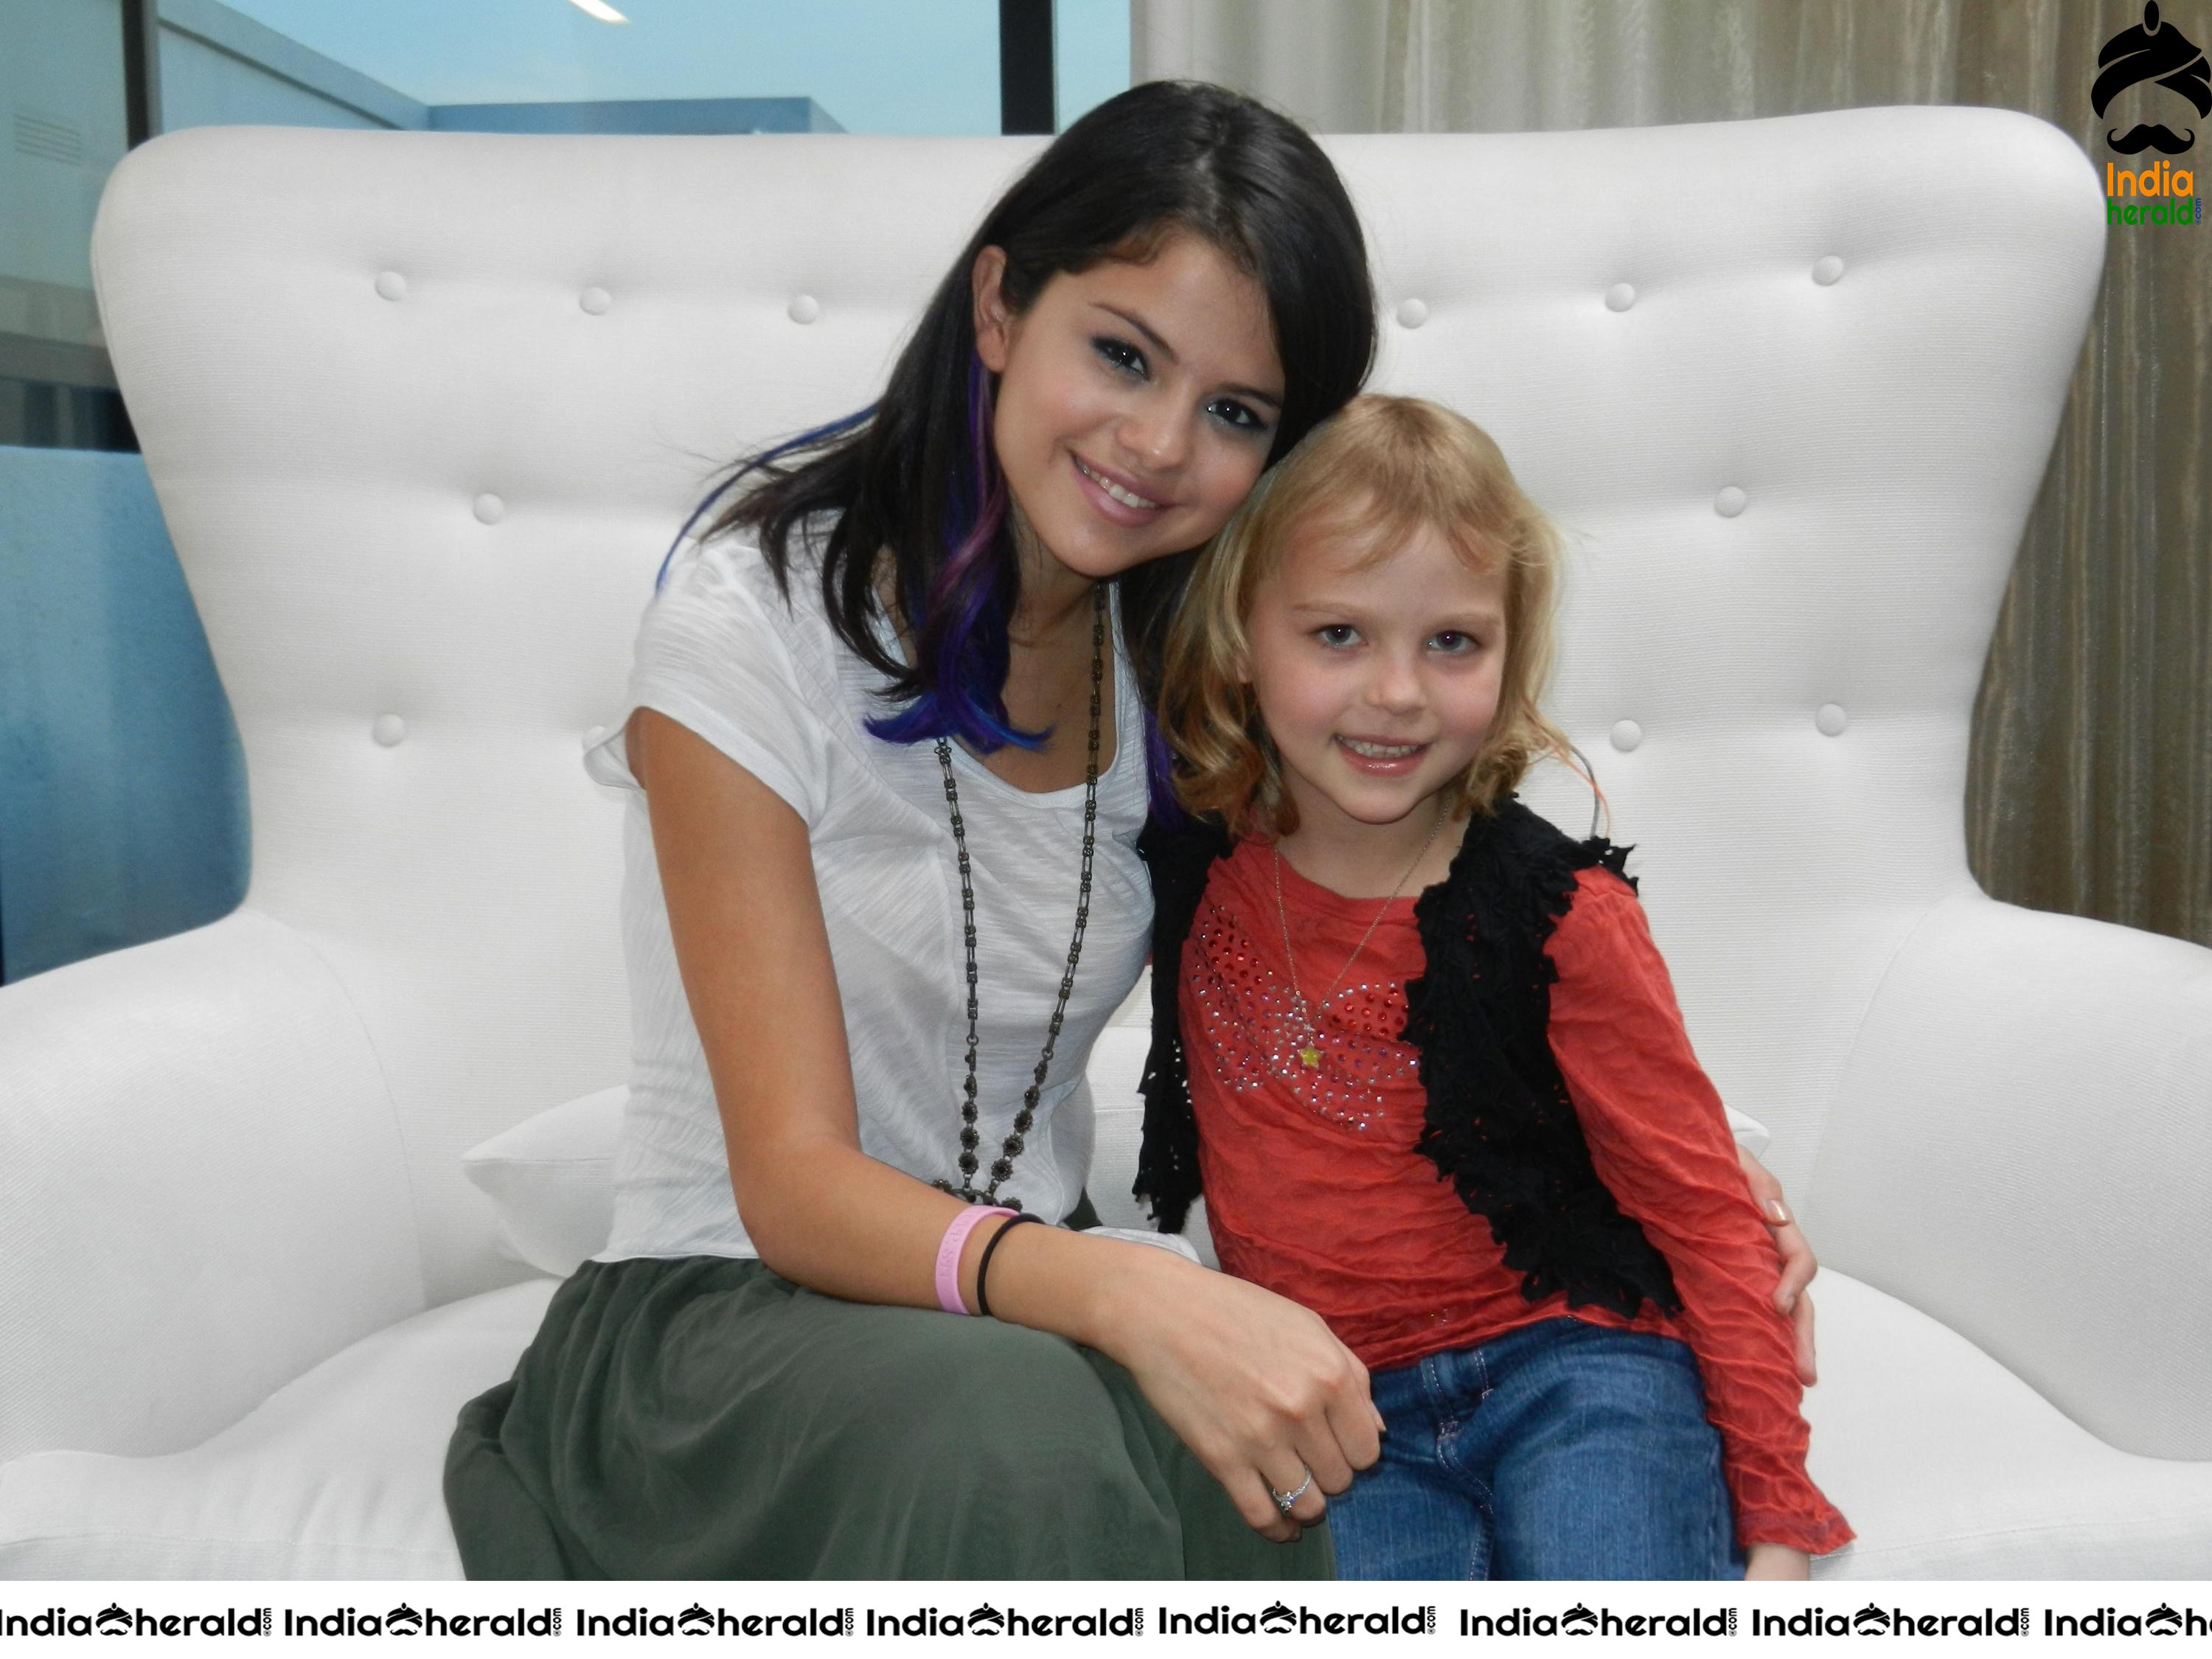 Selena Gomez poses happily with the fans after the Charity event